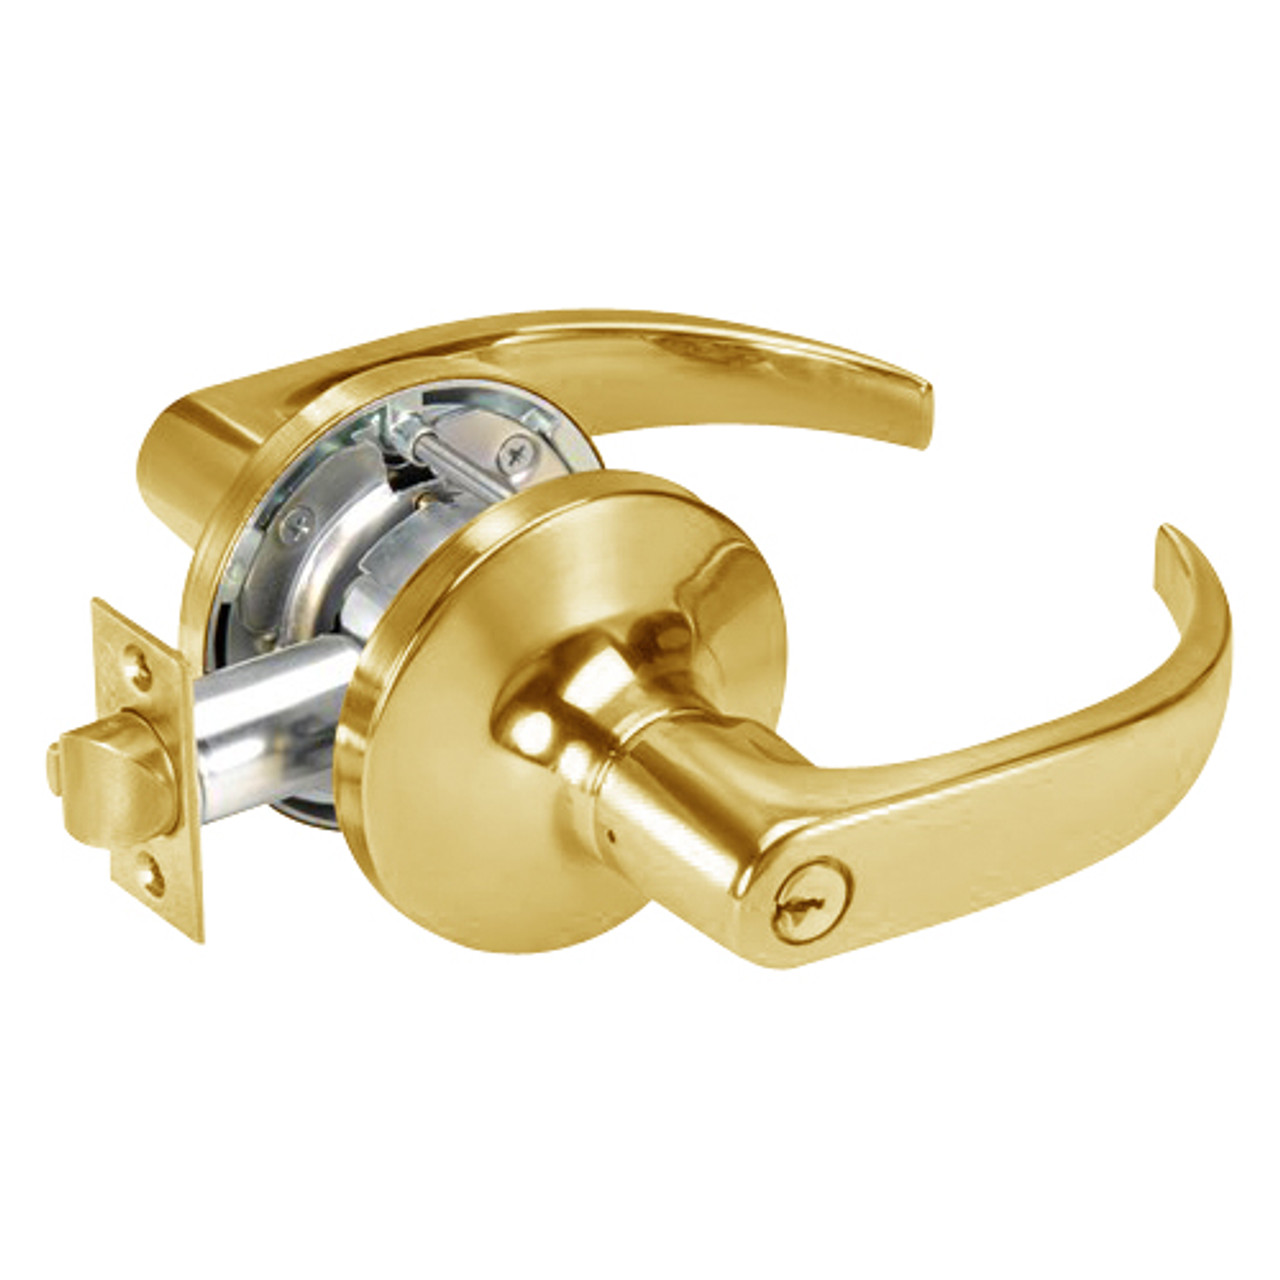 PB5404LN-605 Yale 5400LN Series Single Cylinder Entry Cylindrical Lock with Pacific Beach Lever in Bright Brass